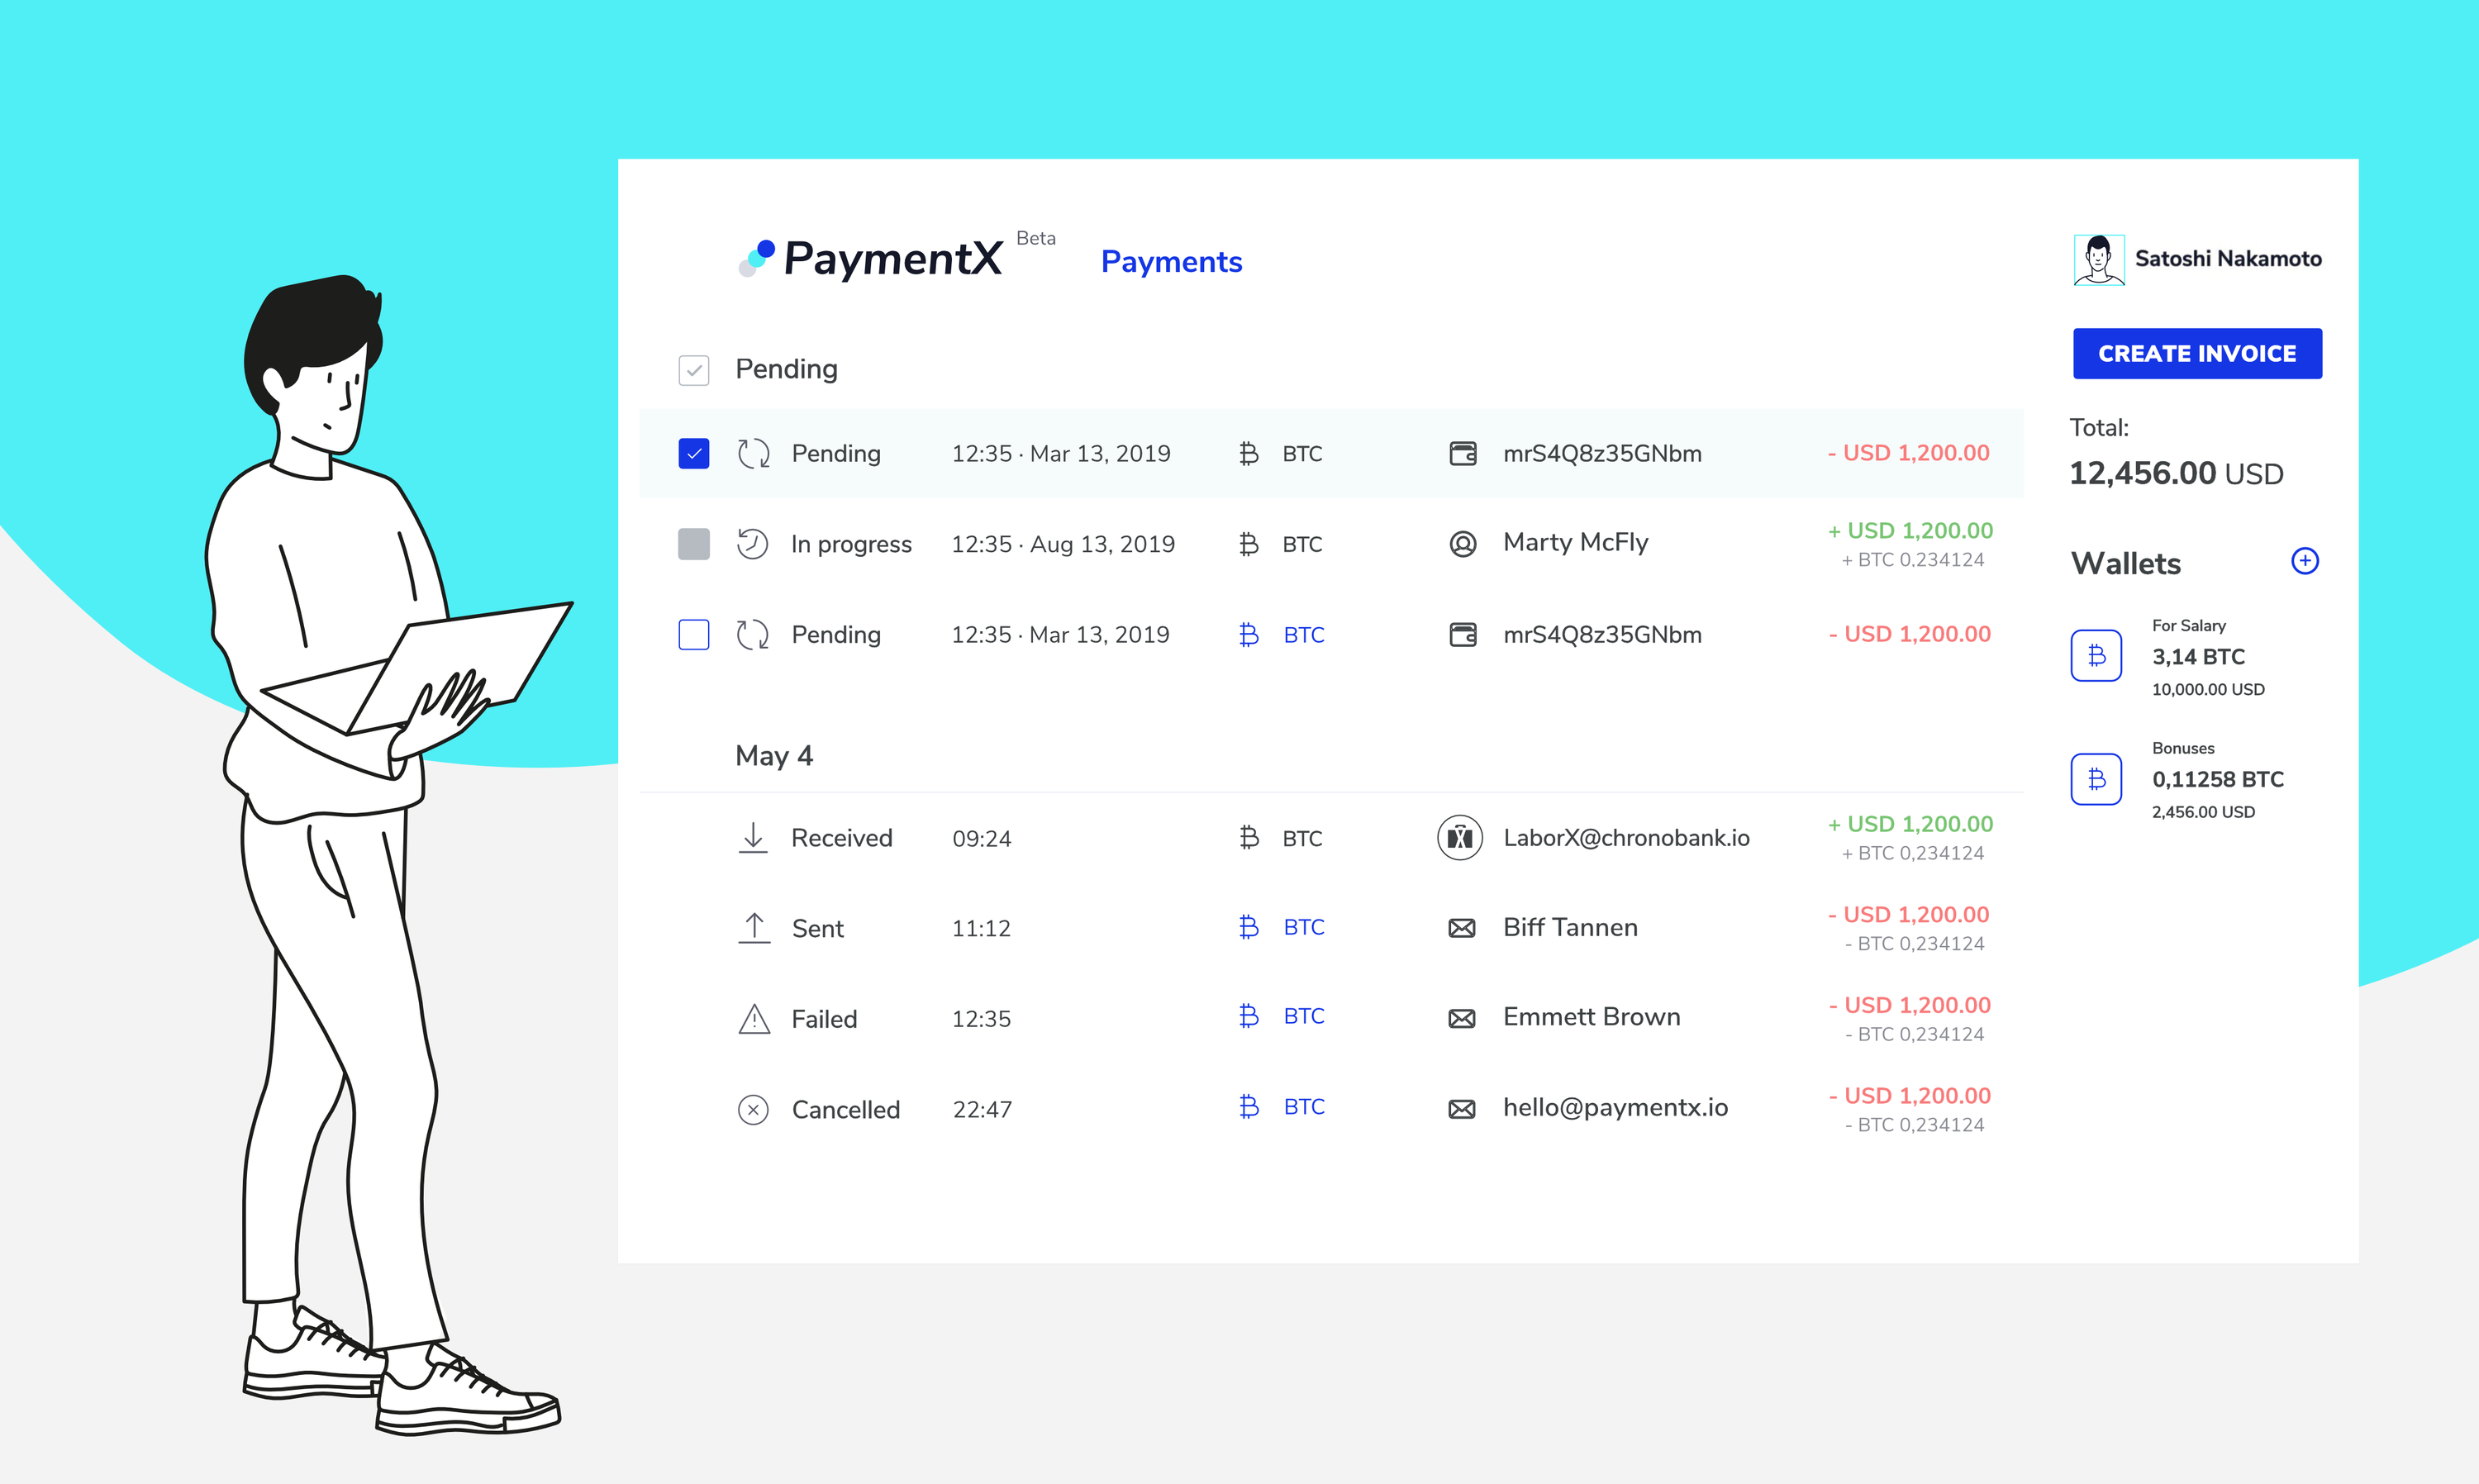 Find detailed information about PaymentX